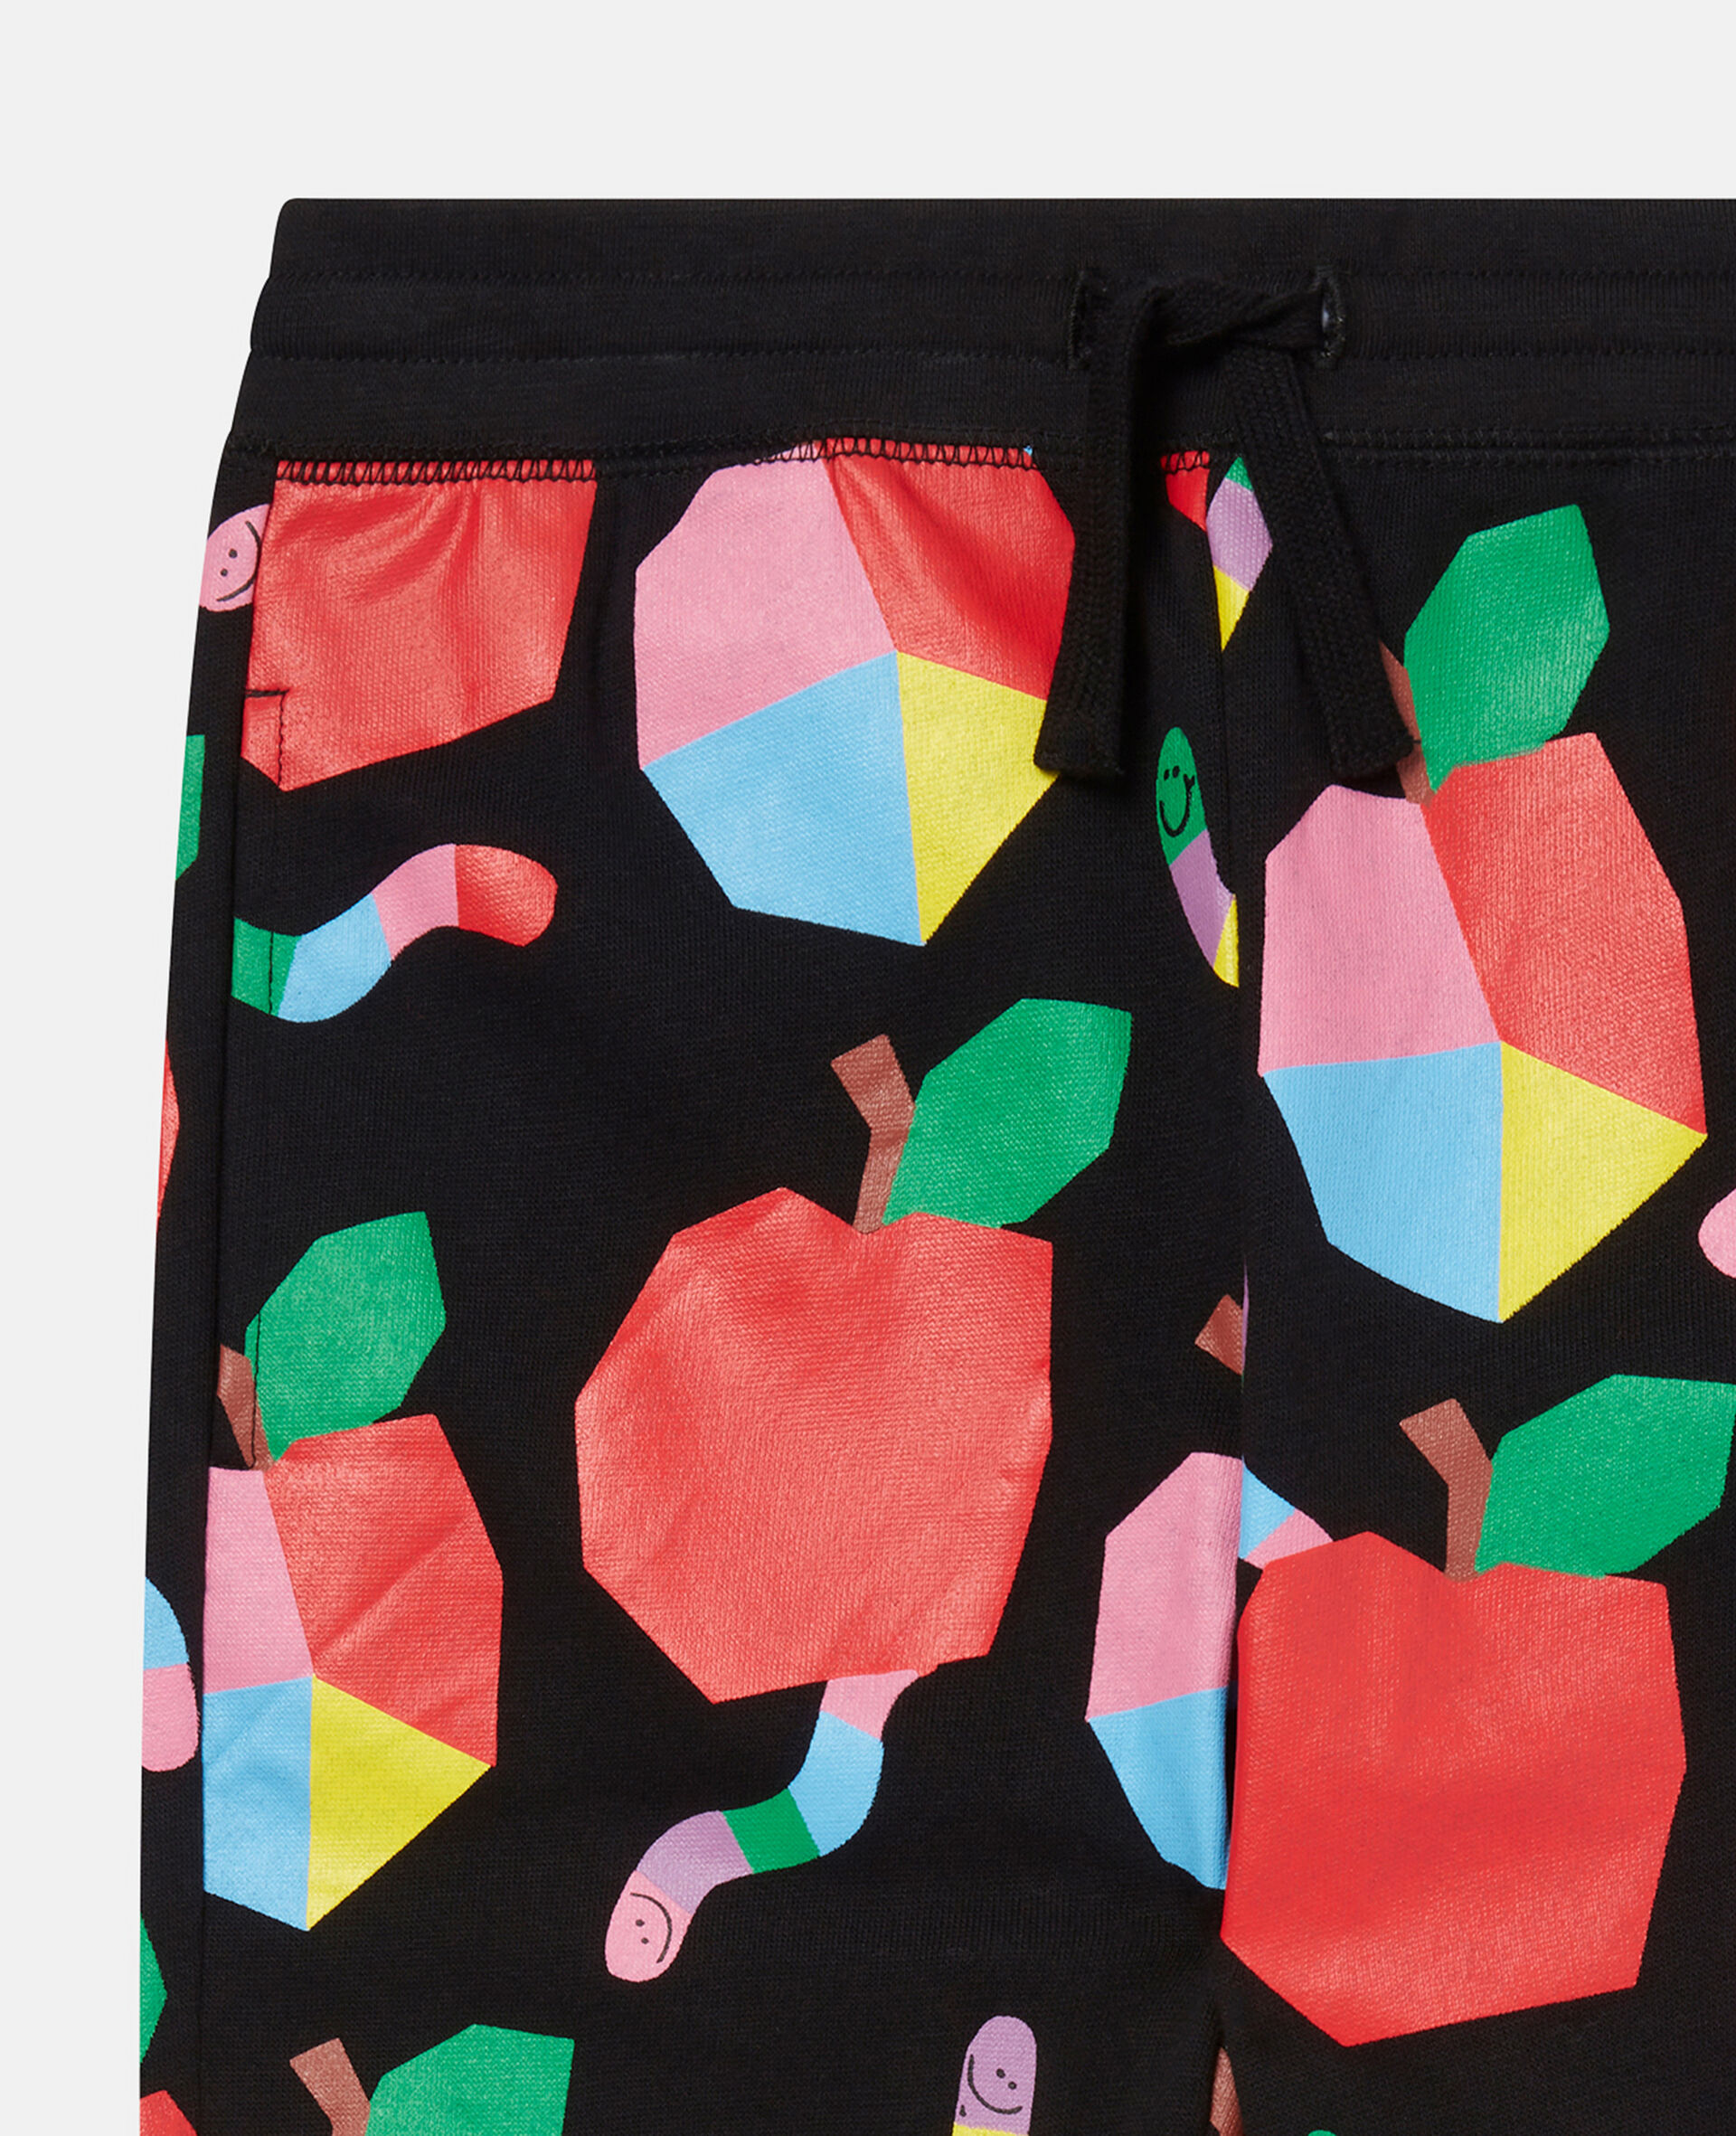 Apples & Worms Print Fleece Joggers-Black-large image number 1